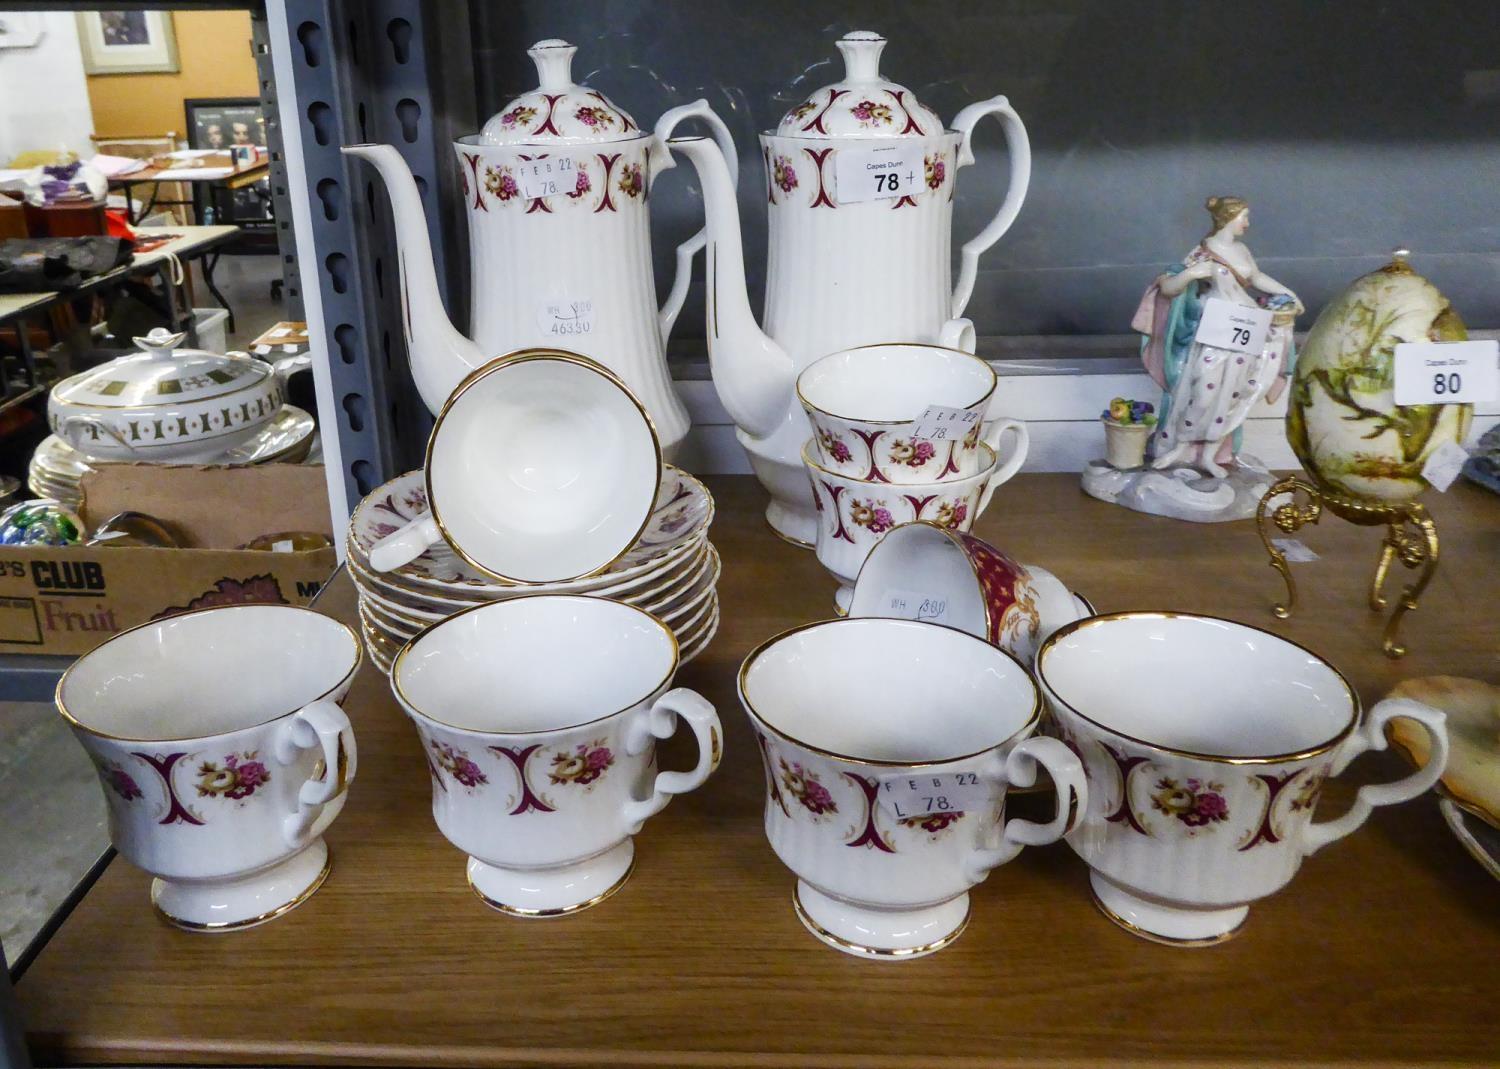 A PAIR OF POST-WAR 'BERKSHIRE' CAFE-AU-LAIT POTS, ALSO A SET OF EIGHT CUPS AND SAUCERS MATCHING, AND